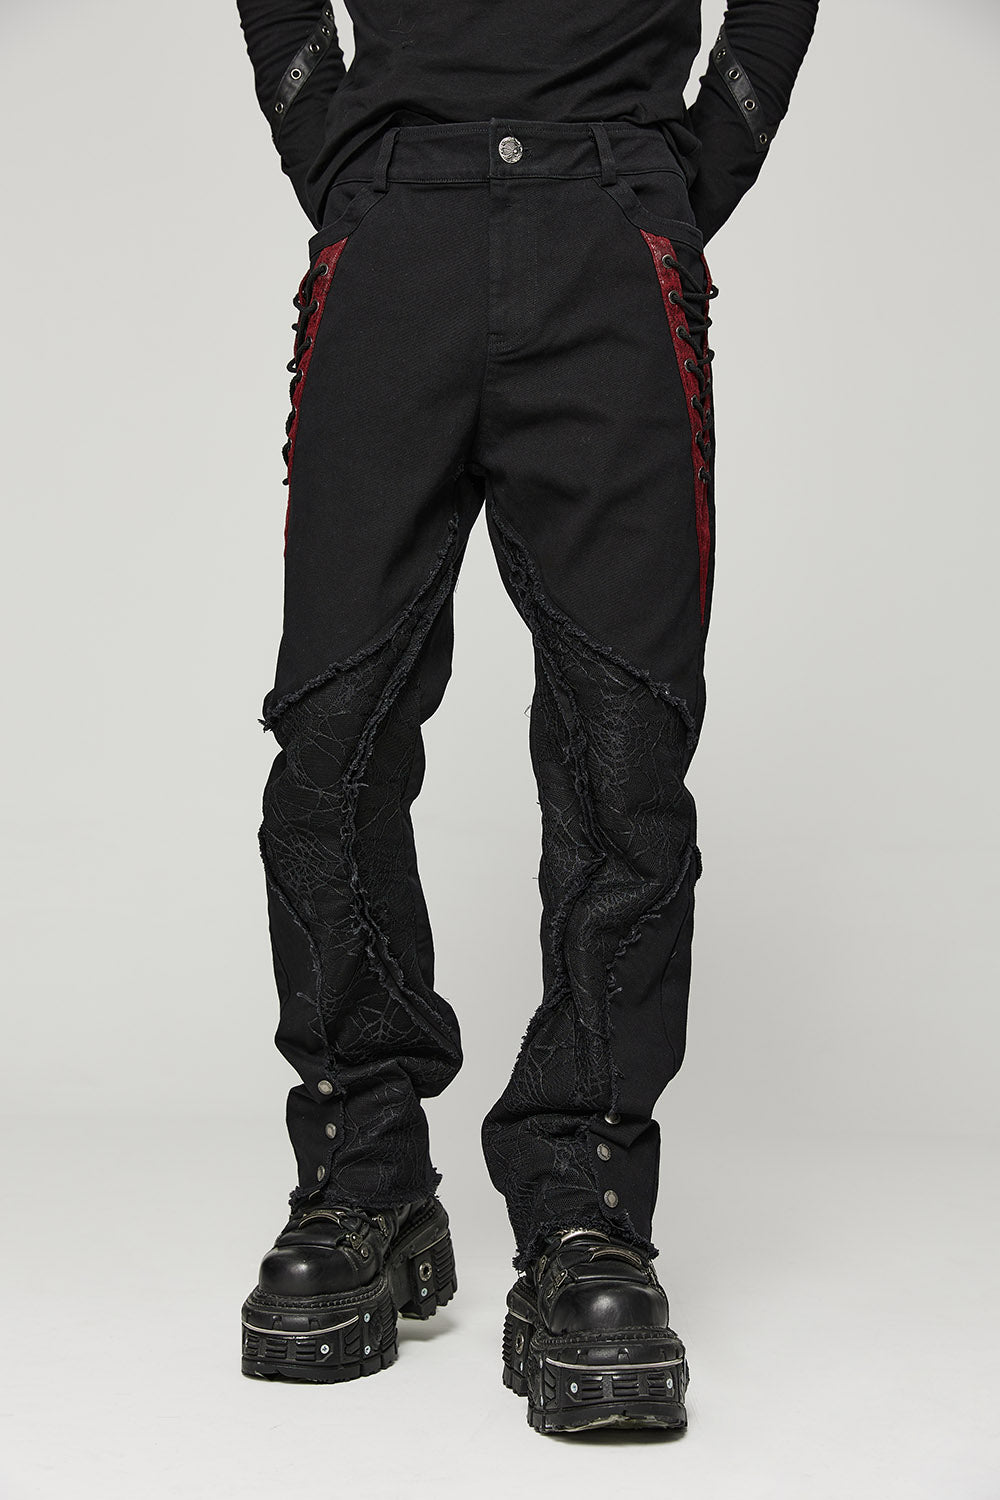 Black Lord Lace-Up Pants [BLACK/RED]